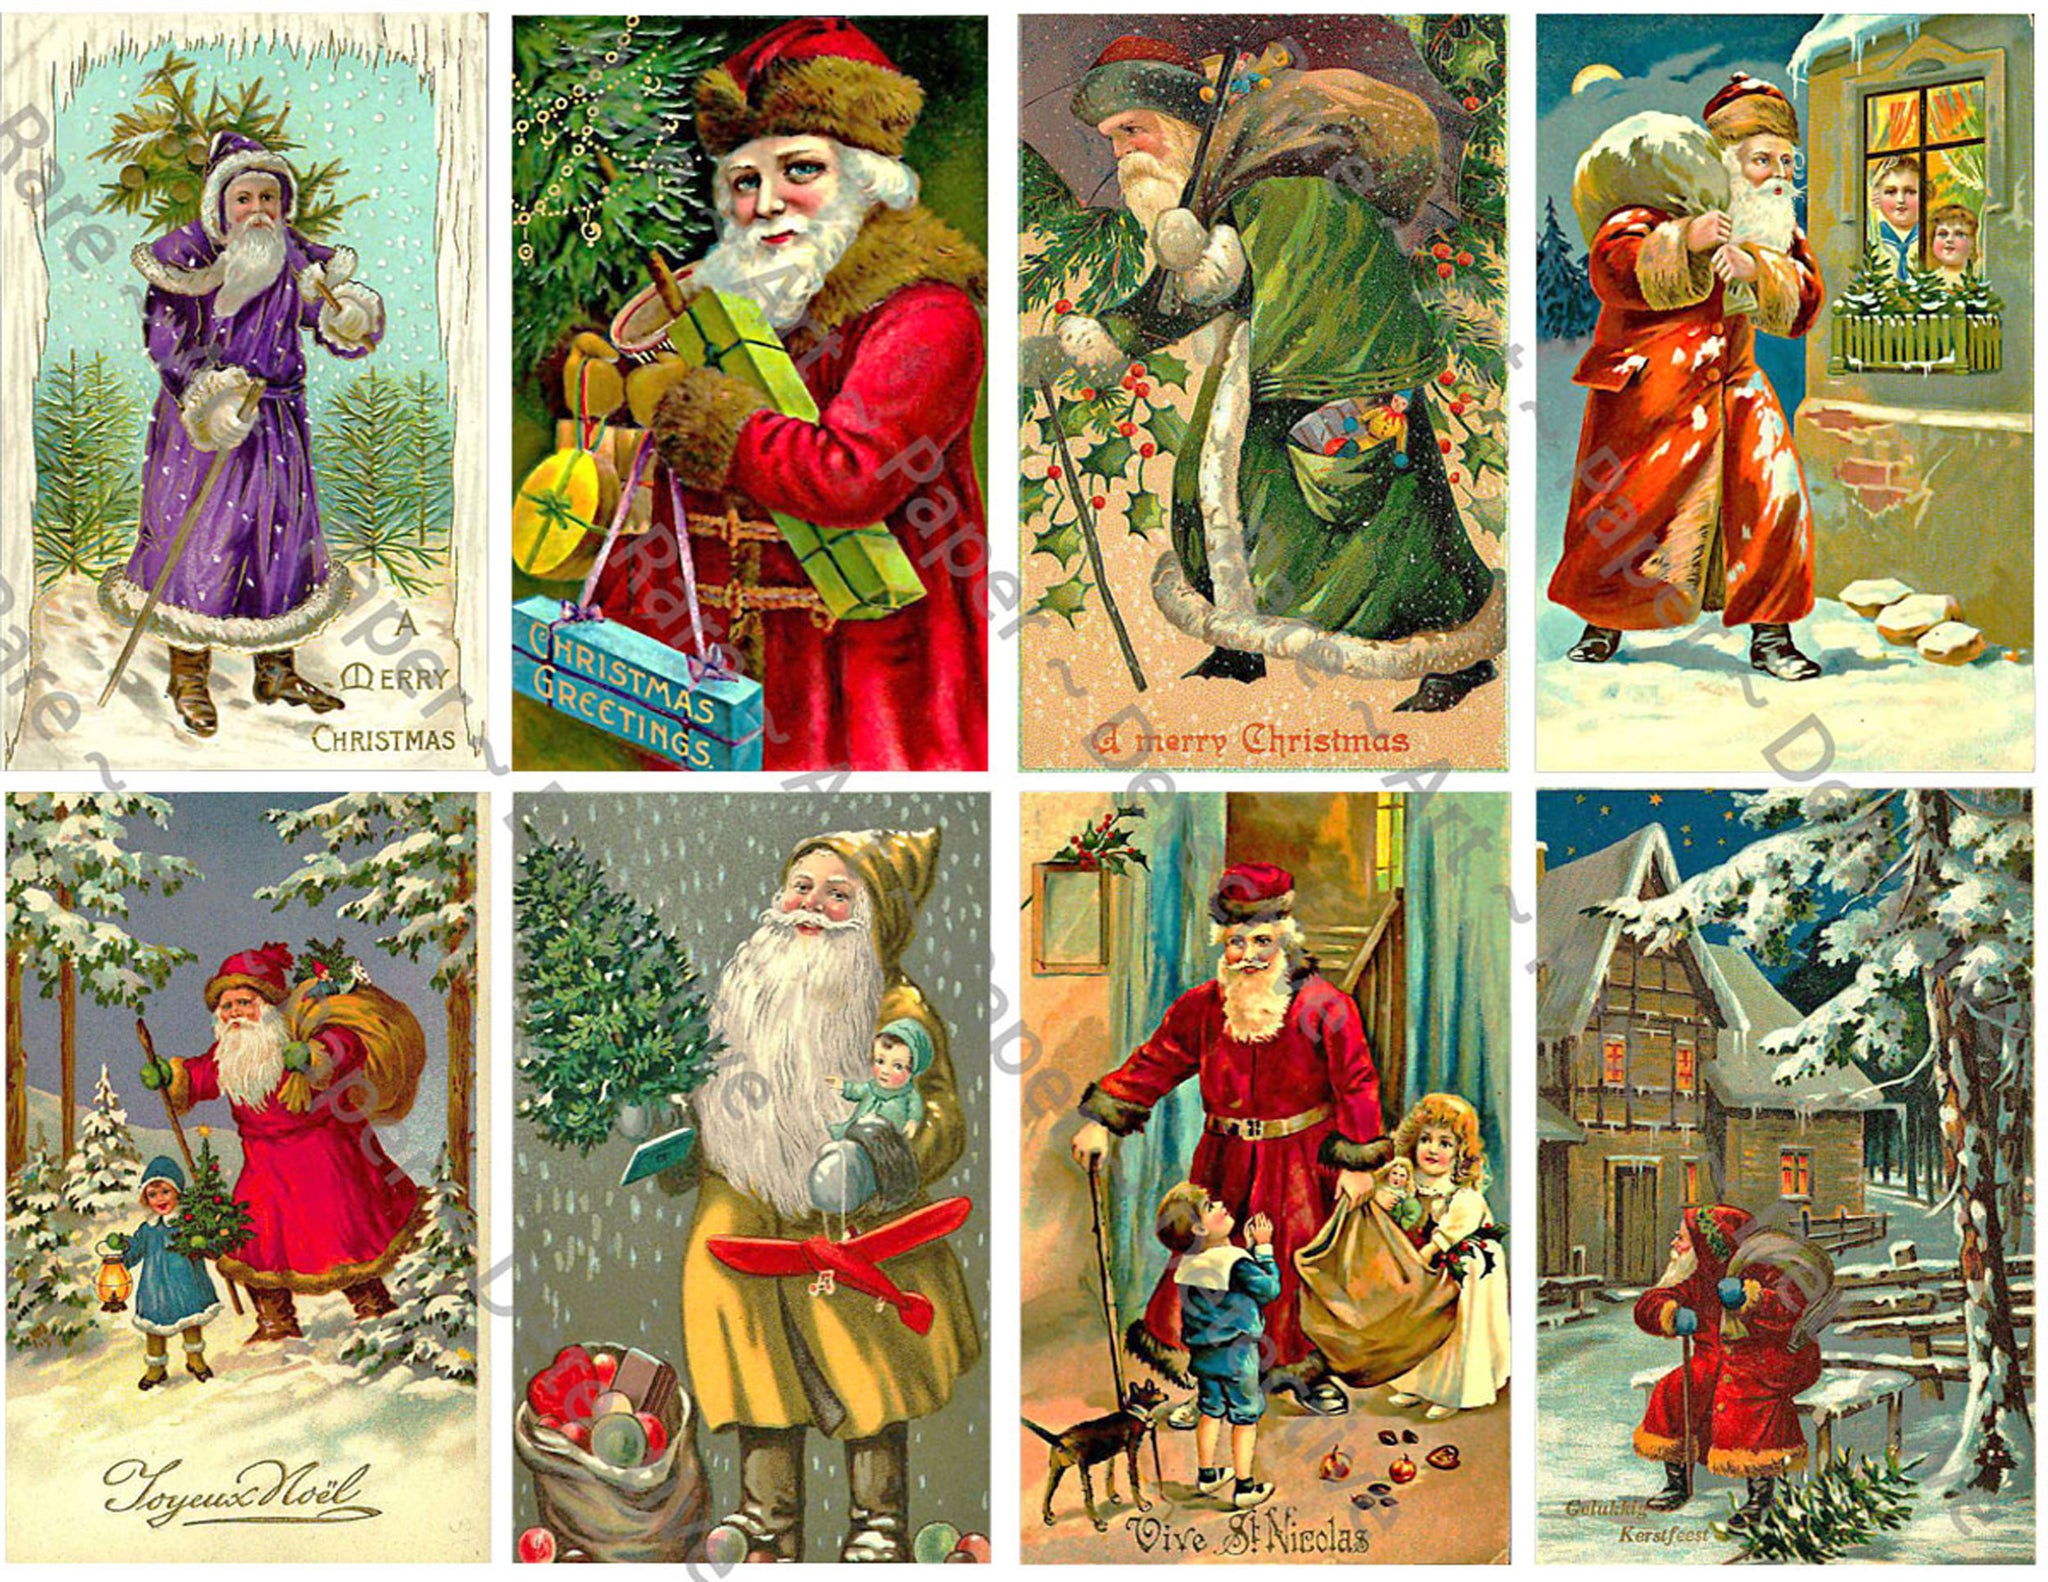 Christmas Stickers, 8 Pcs. Deluxe Set of Old Fashioned Postcard Journal Images, 4" x 2.5" each, Santa Claus, #647